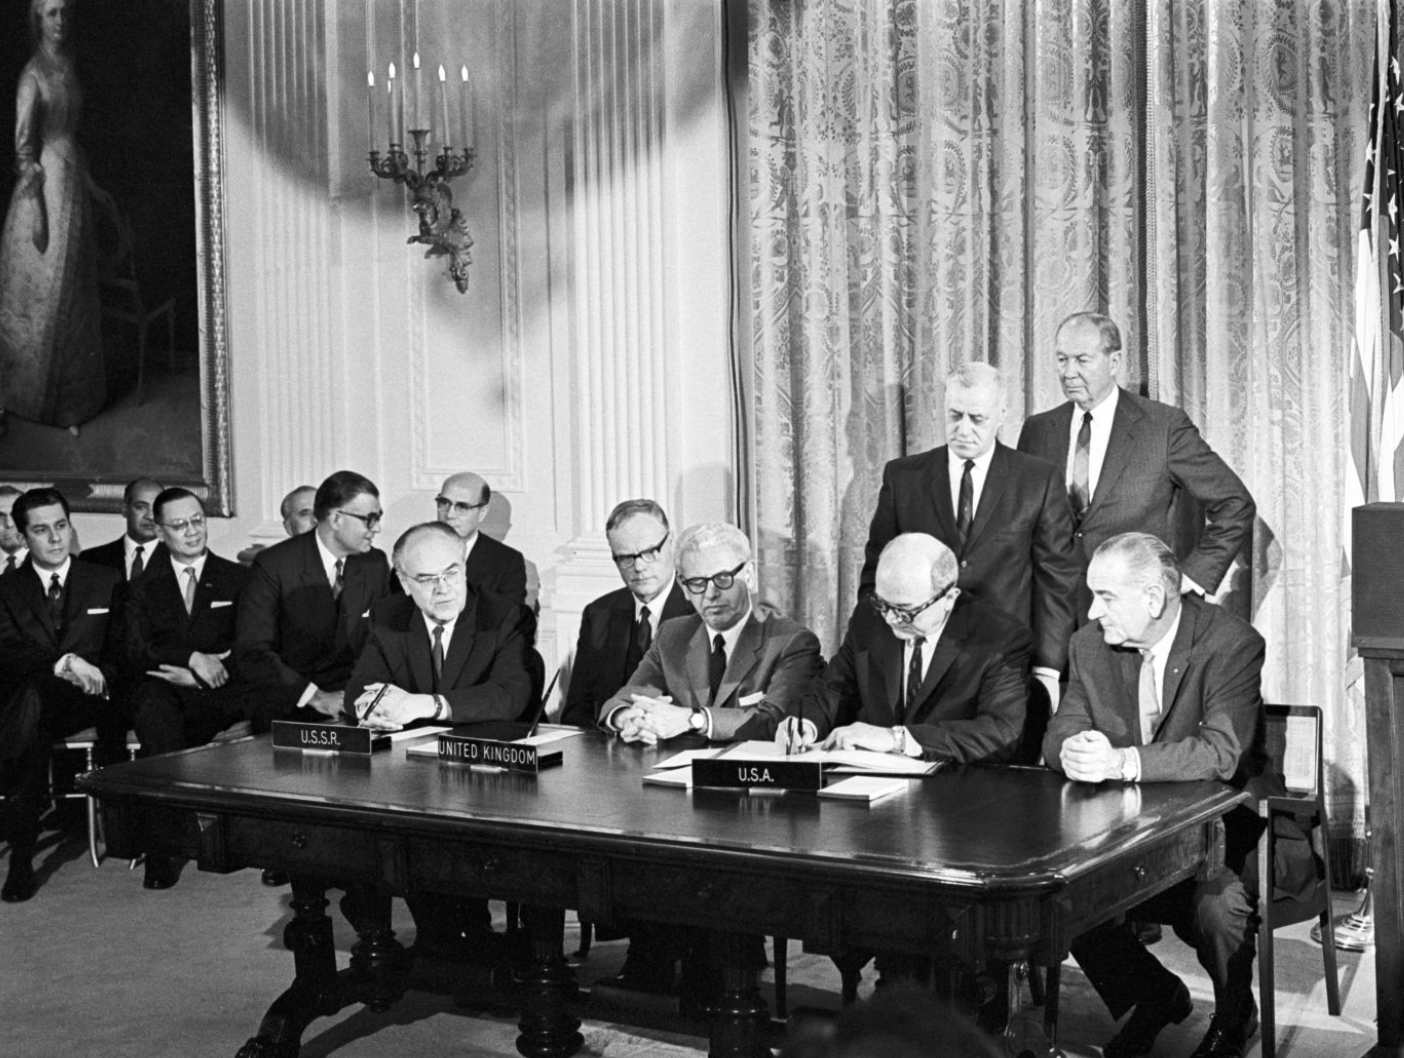 the signing of the outer space treaty, 1967